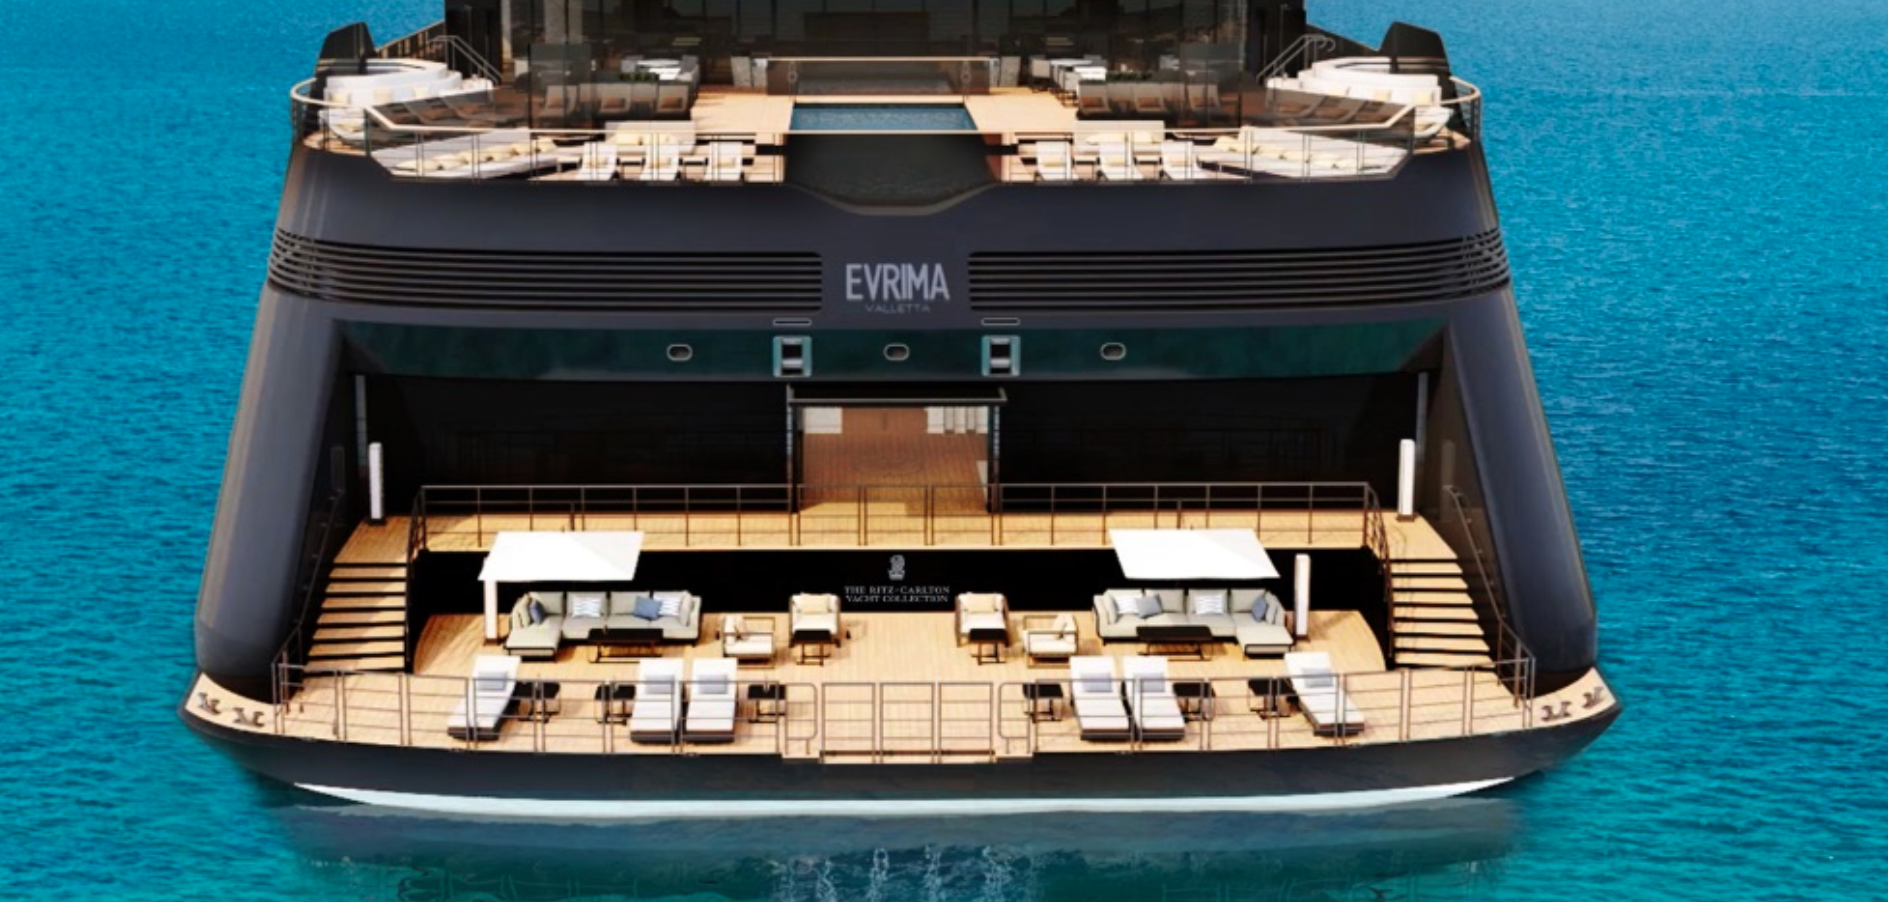 The Ritz-Carlton Yacht Collection is growing with 2 new